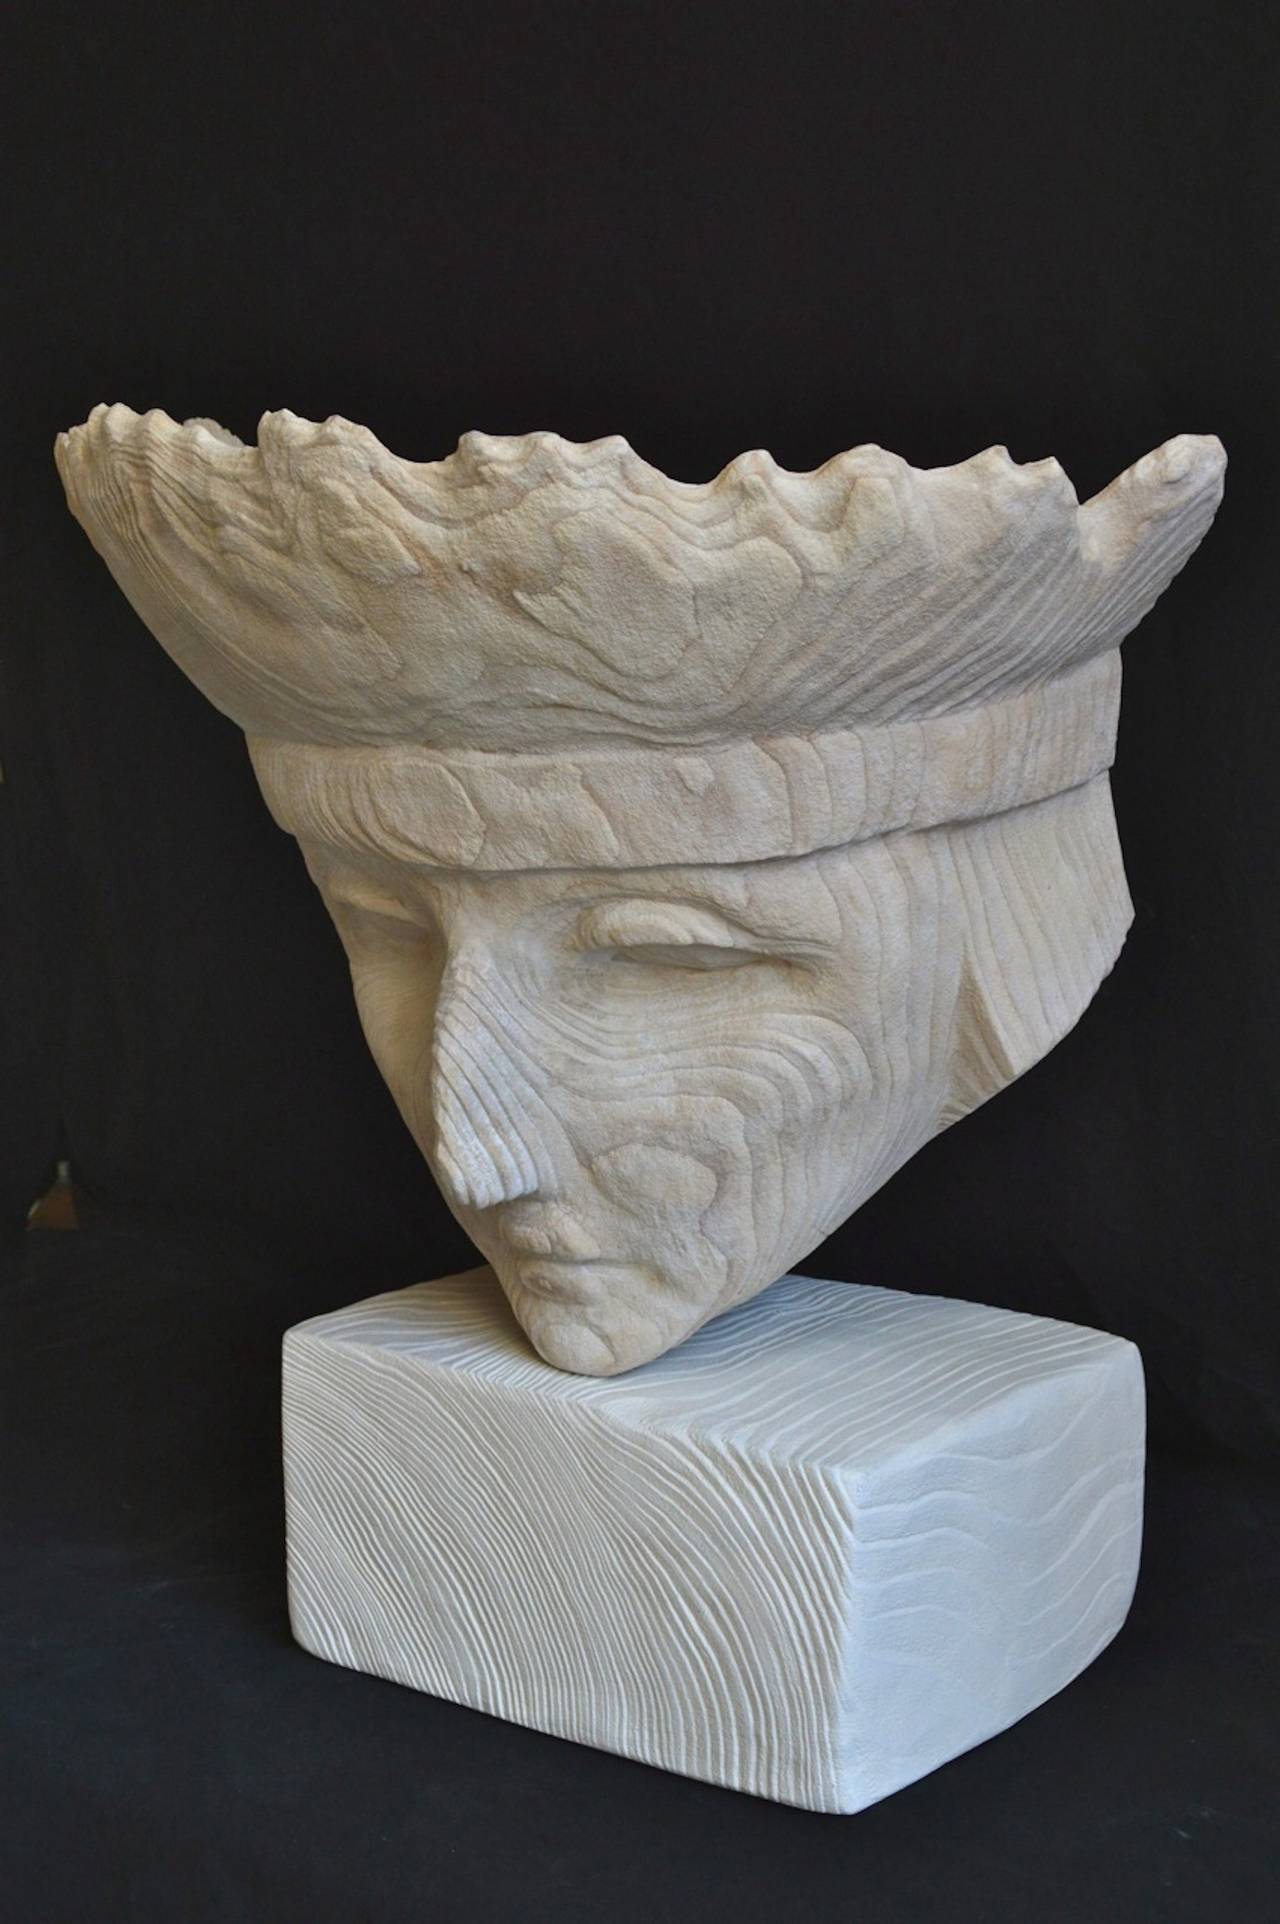 This is an original sculpture carved from Cedar (therefore not a limited edition cast from a mould taken from an original sculpture). It immediately takes the viewer back to the Kings of medieval history and carries a calm yet pensive air that